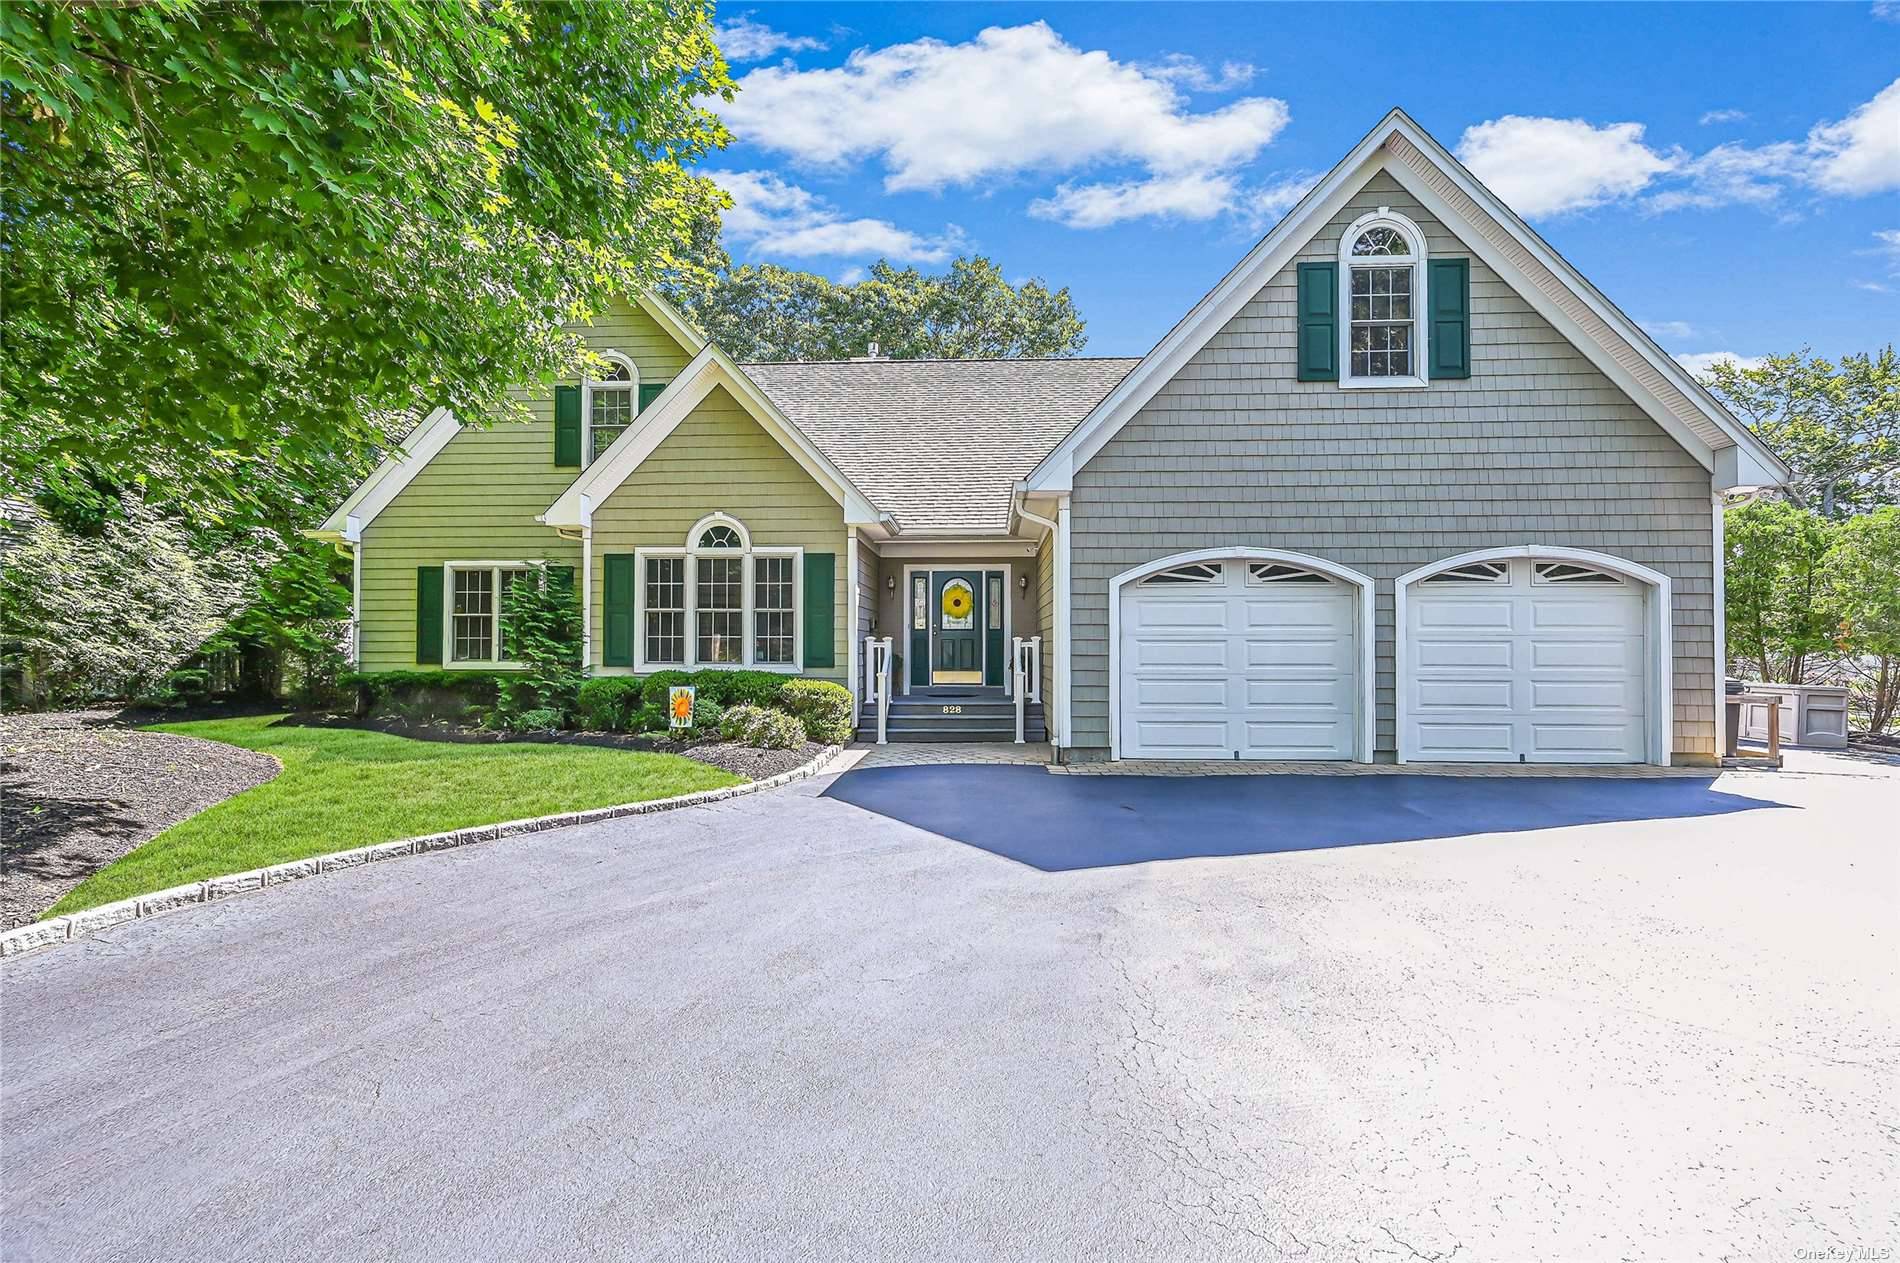 HGTV Fans Welcome to 828 Pondview Road, Riverhead NY.